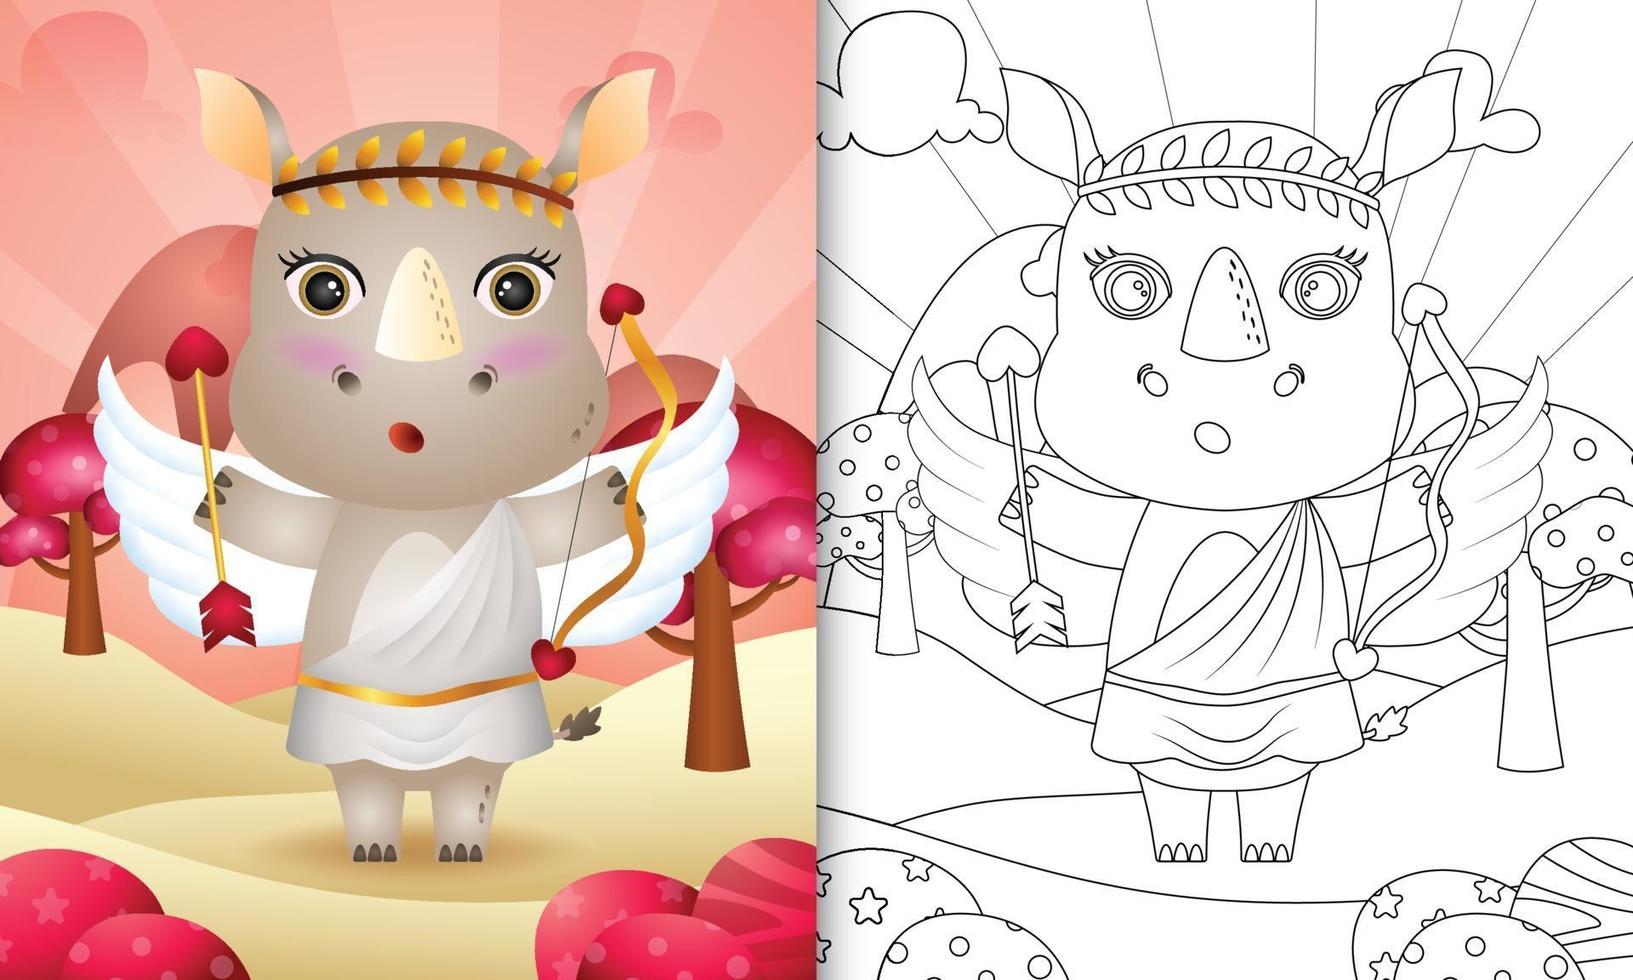 coloring book for kids with a cute rhino angel using cupid costume themed valentine day vector